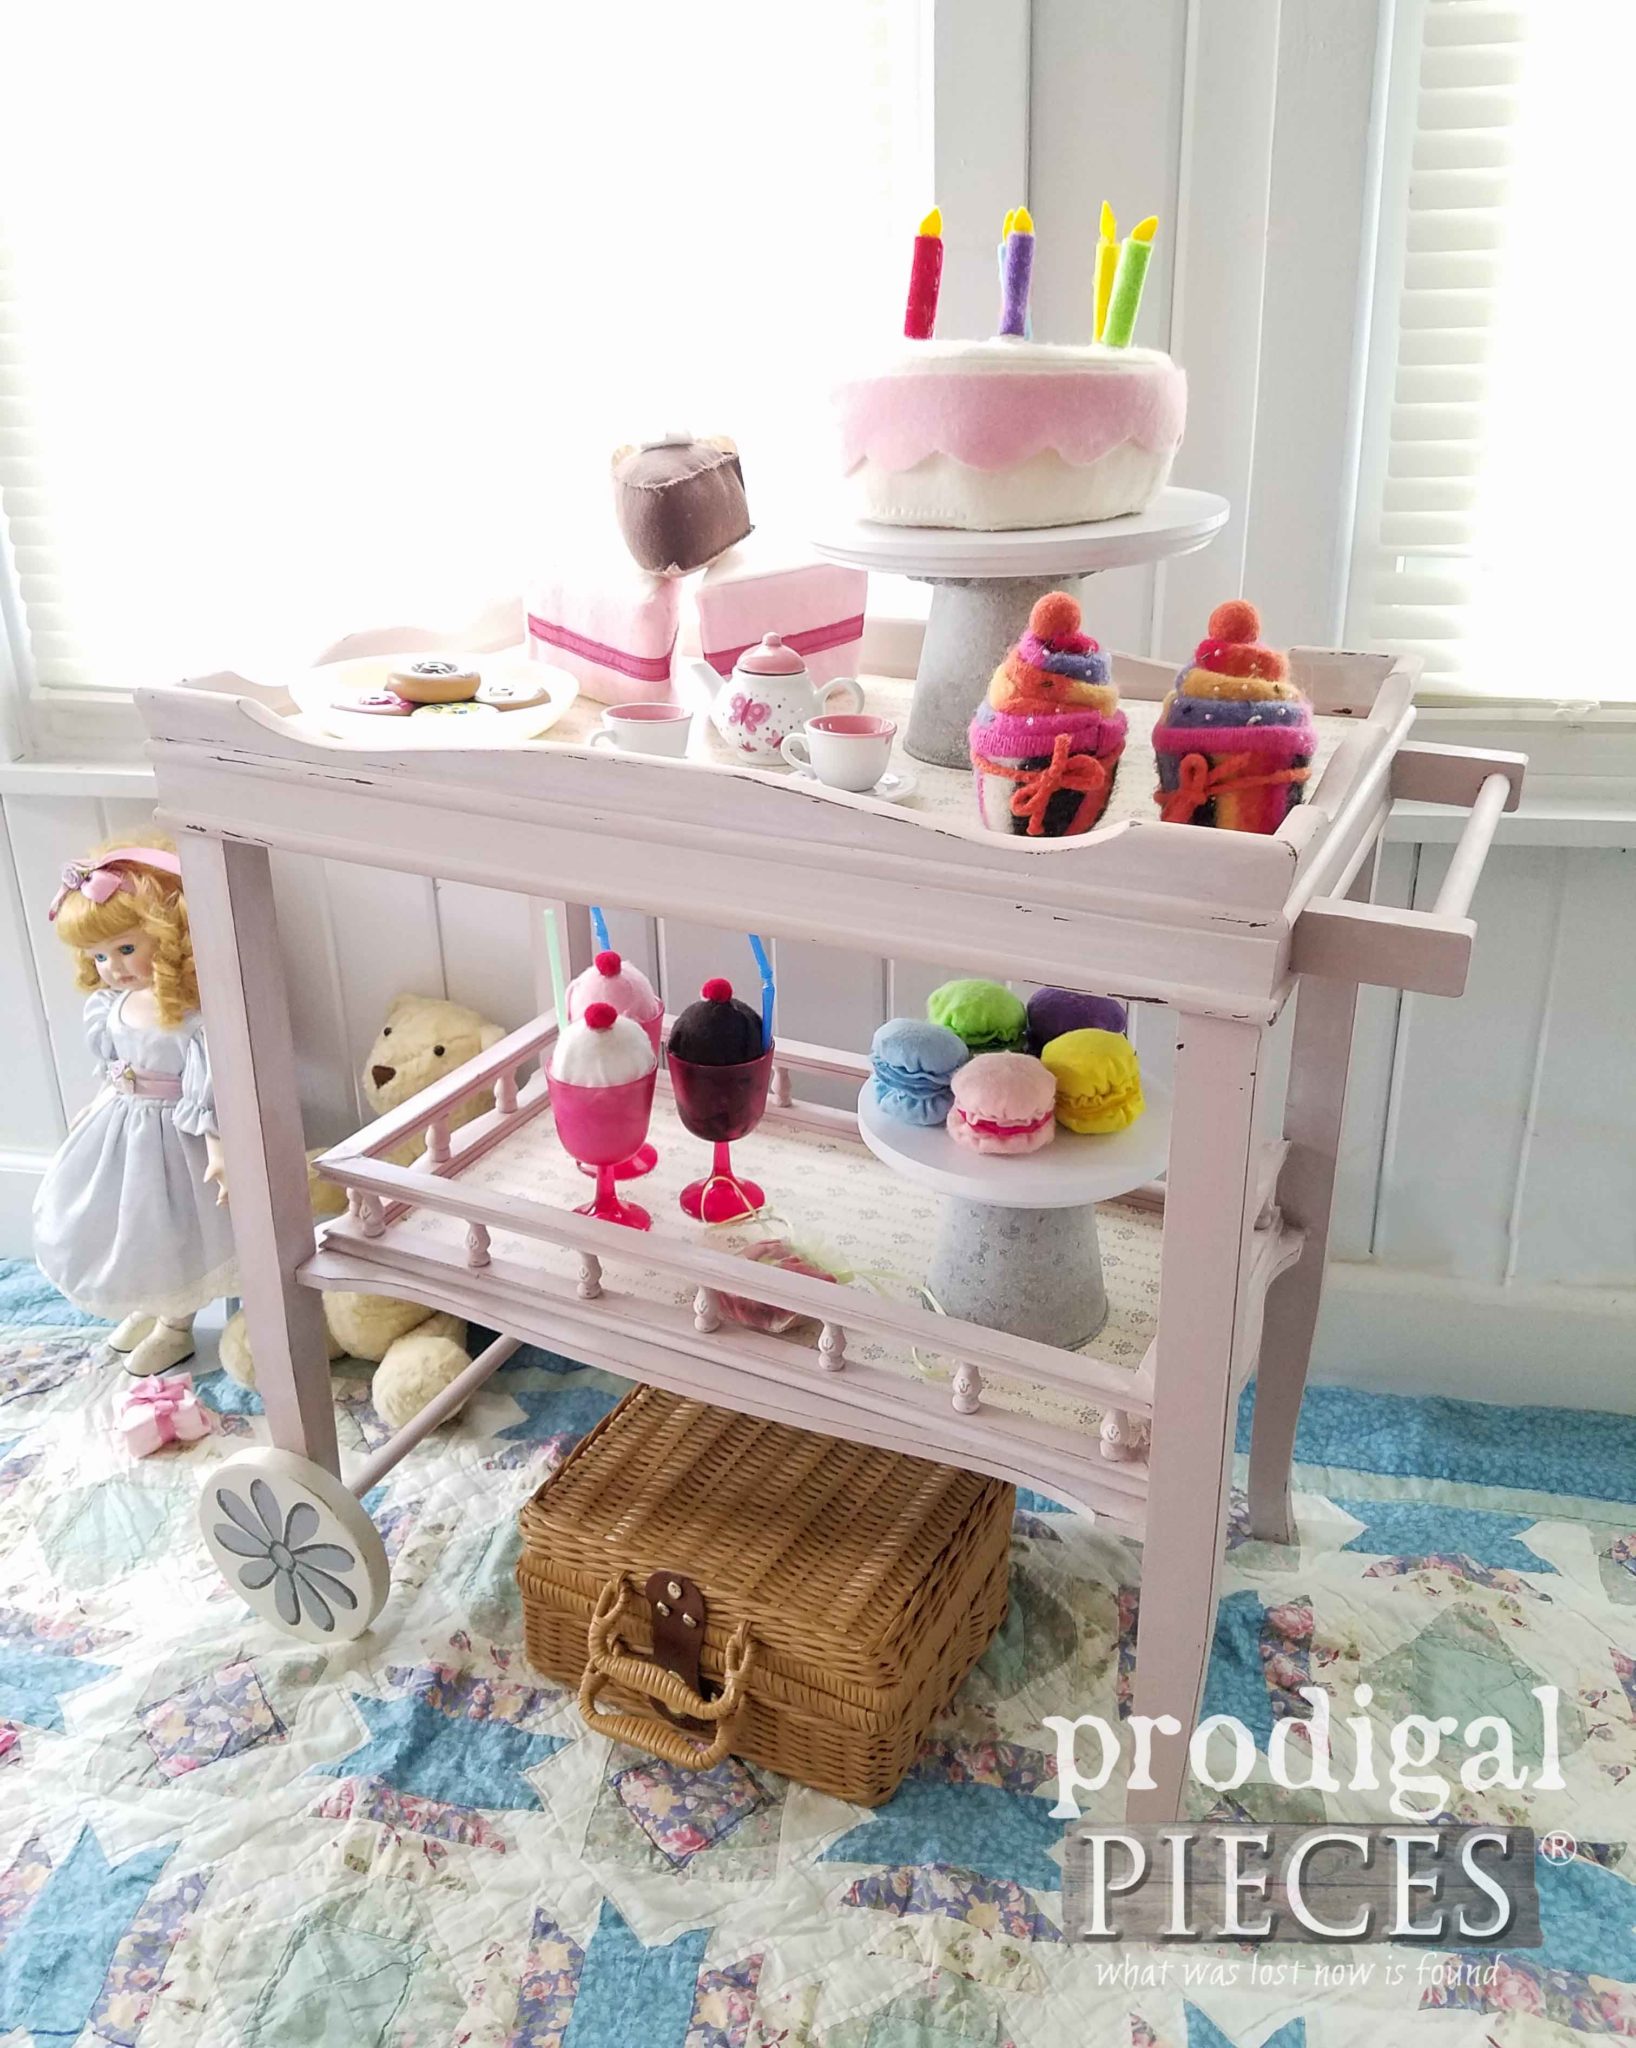 Sweet Pink Child's Tea Cart with Handmade Food and Accessories by Larissa of Prodigal Pieces | prodigalpieces.com